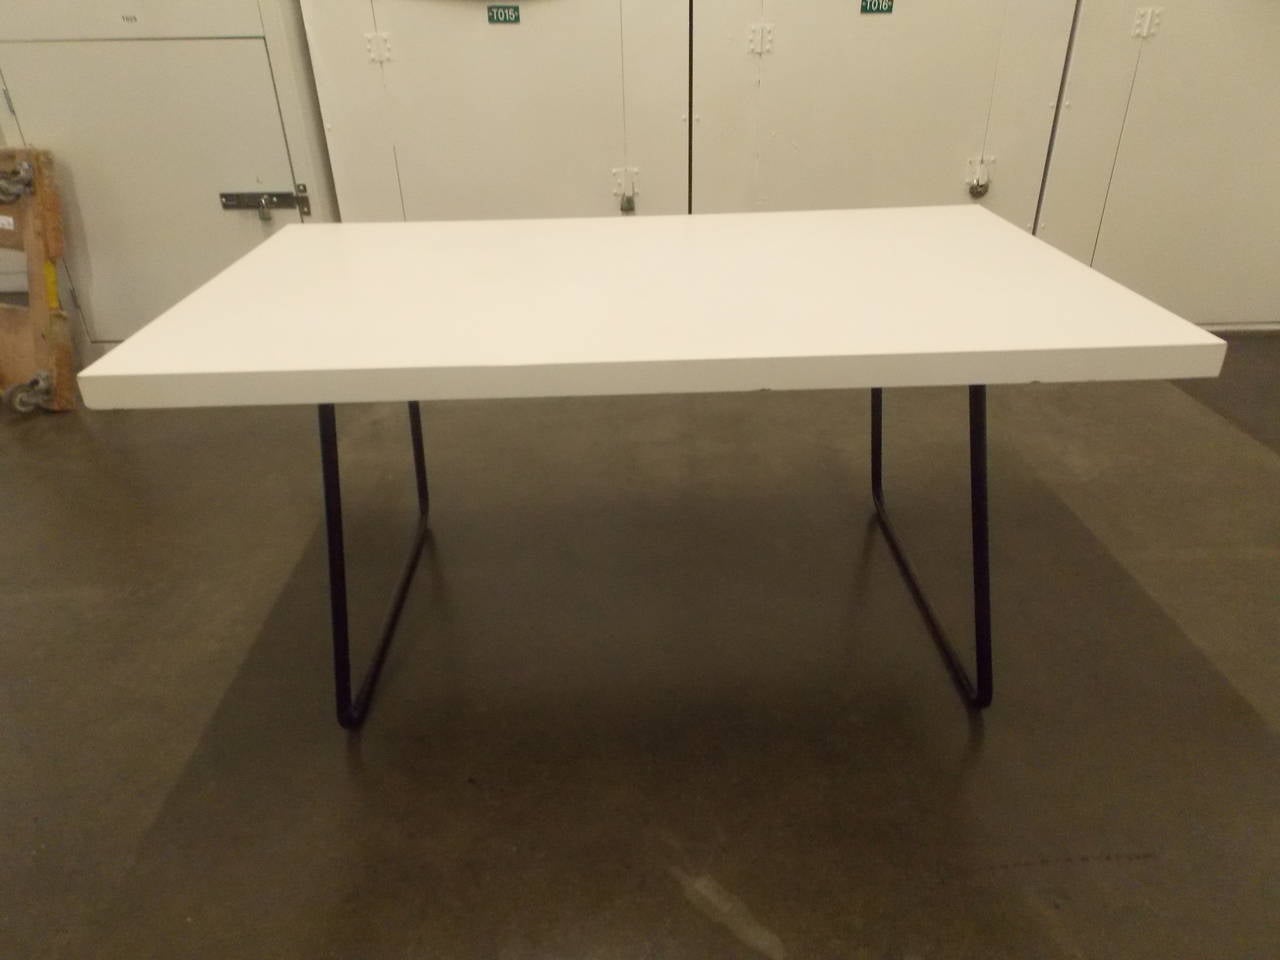 This table originally takes a glass top and still has the fittings for one.
It appears to have a custom order top that sits over the frame.
Made of plywood with white laminate.
The base frame is powder coated steel.
Great to use also as a desk.